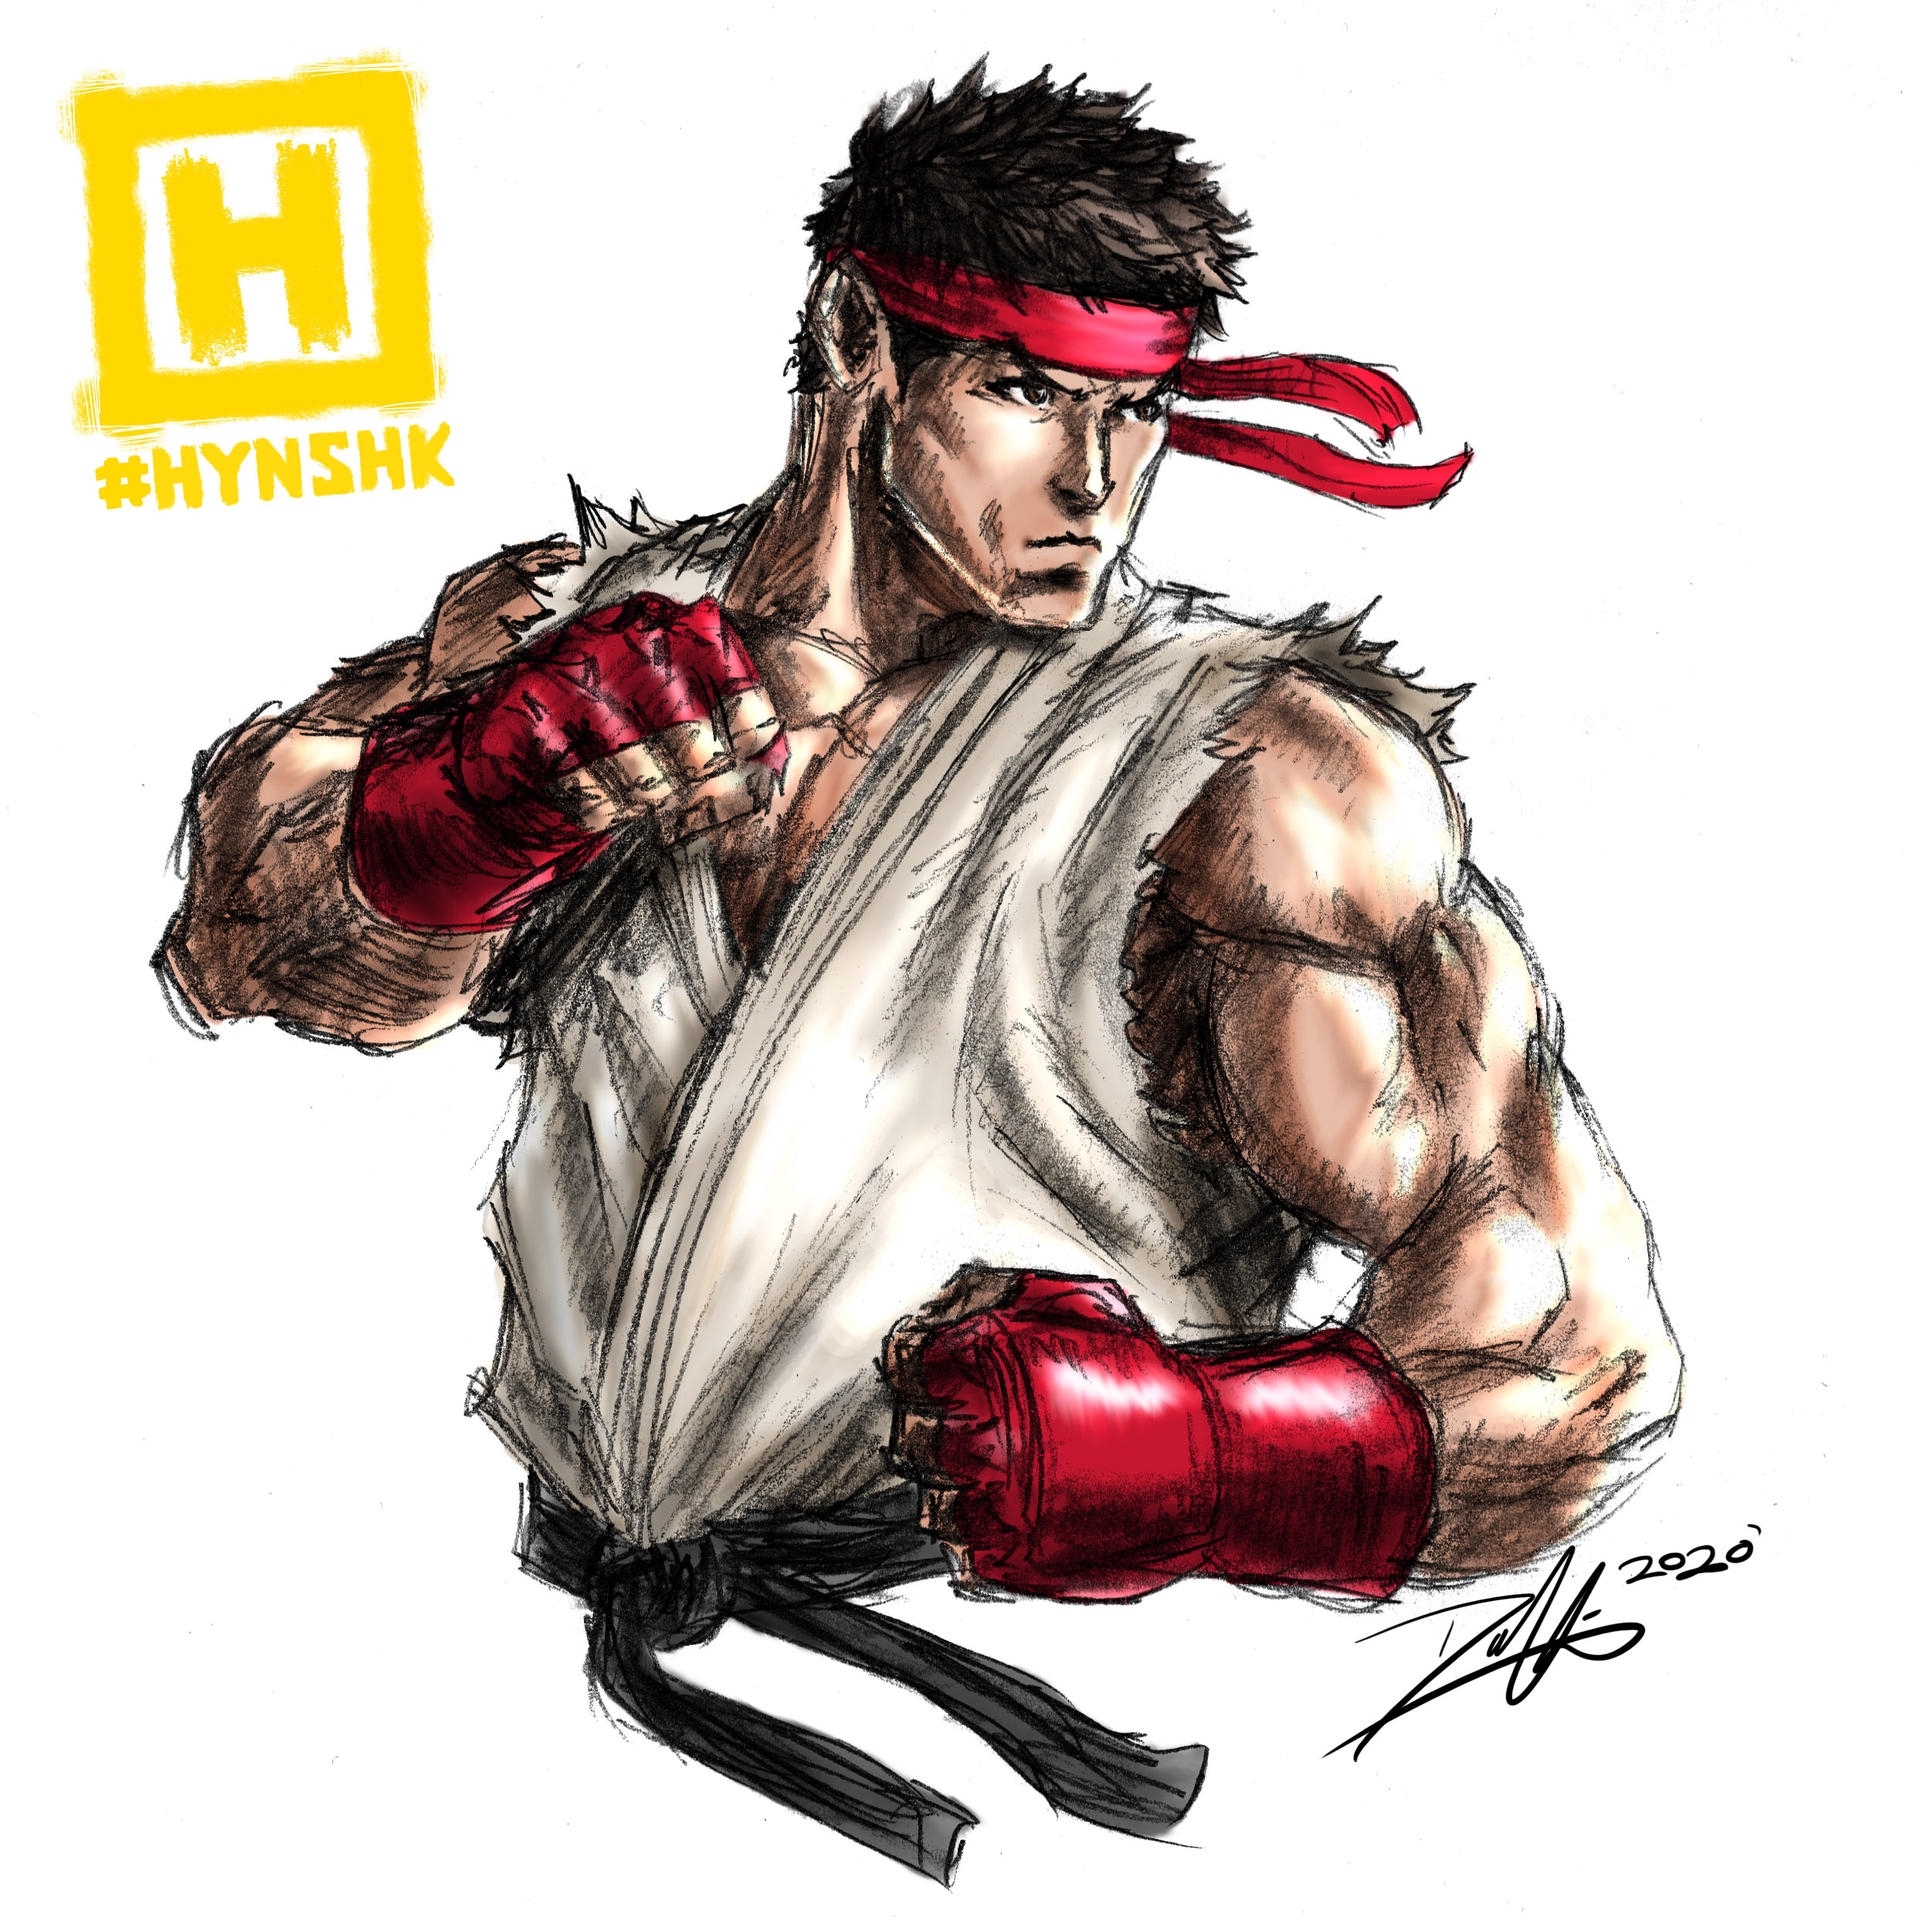 CHARACTER SELECT - RYU by viniciusmt2007 on DeviantArt